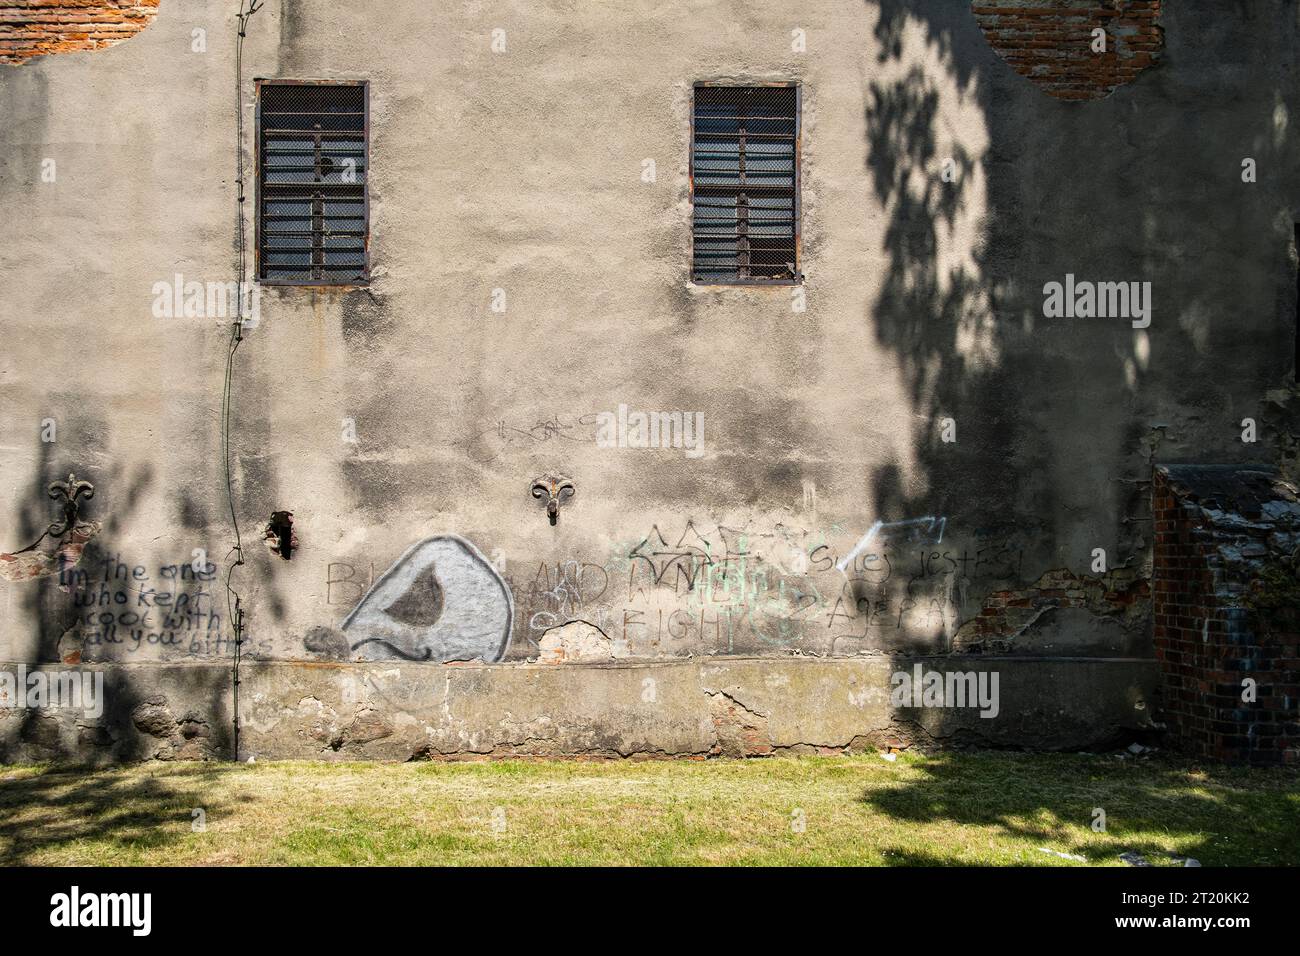 Wall graffiti on an dilapidated building integrated into the old historic town wall of Namyslow (Namslau), Opole Voivodeship, Poland. Stock Photo